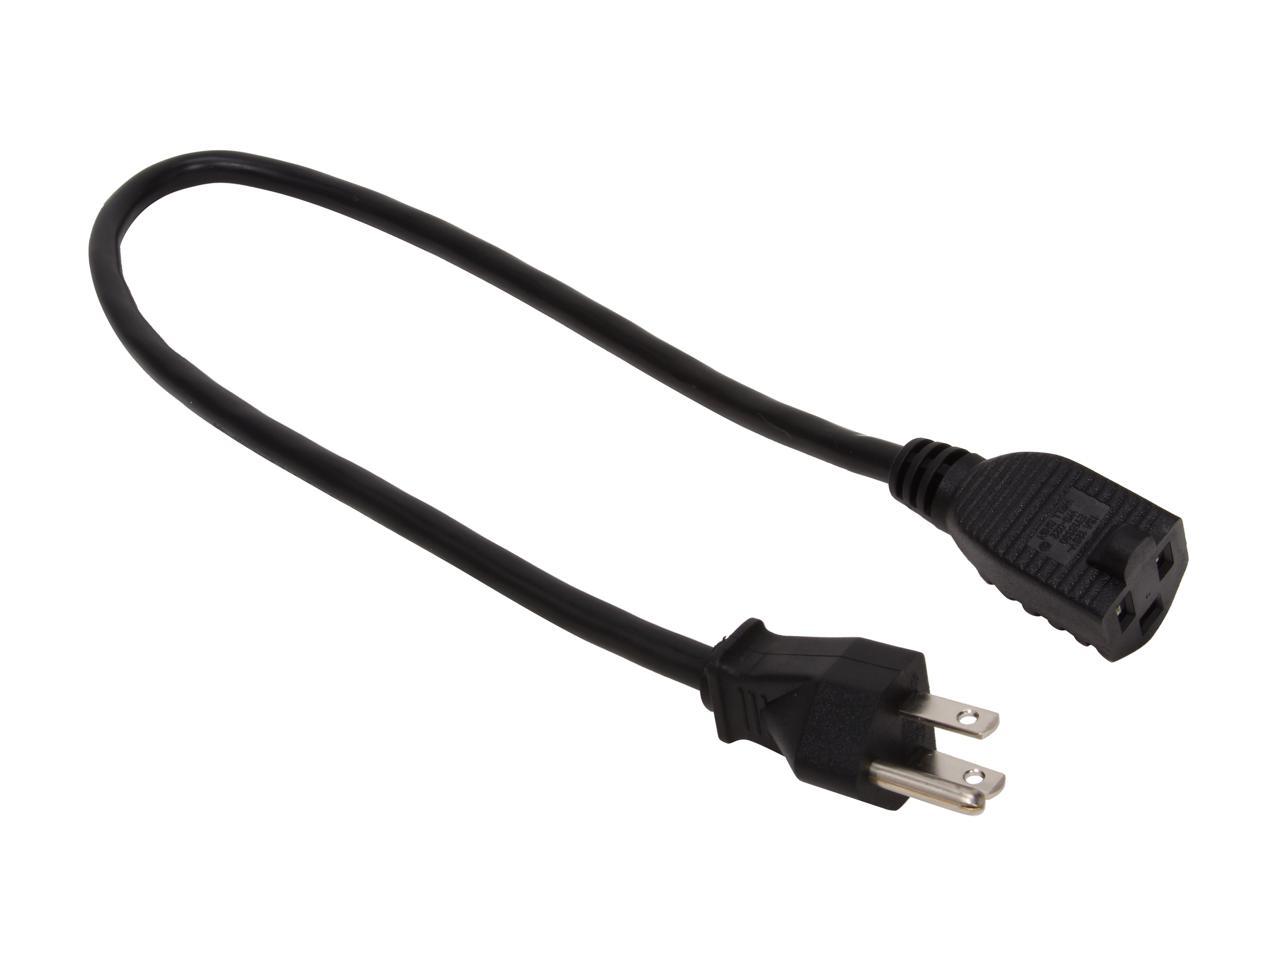 C2G 29929 16 AWG Outlet Saver Power Extension Cord (NEMA 5-15P to NEMA 5-15R) TAA Compliant, Black (2 Feet, 0.60 Meters)